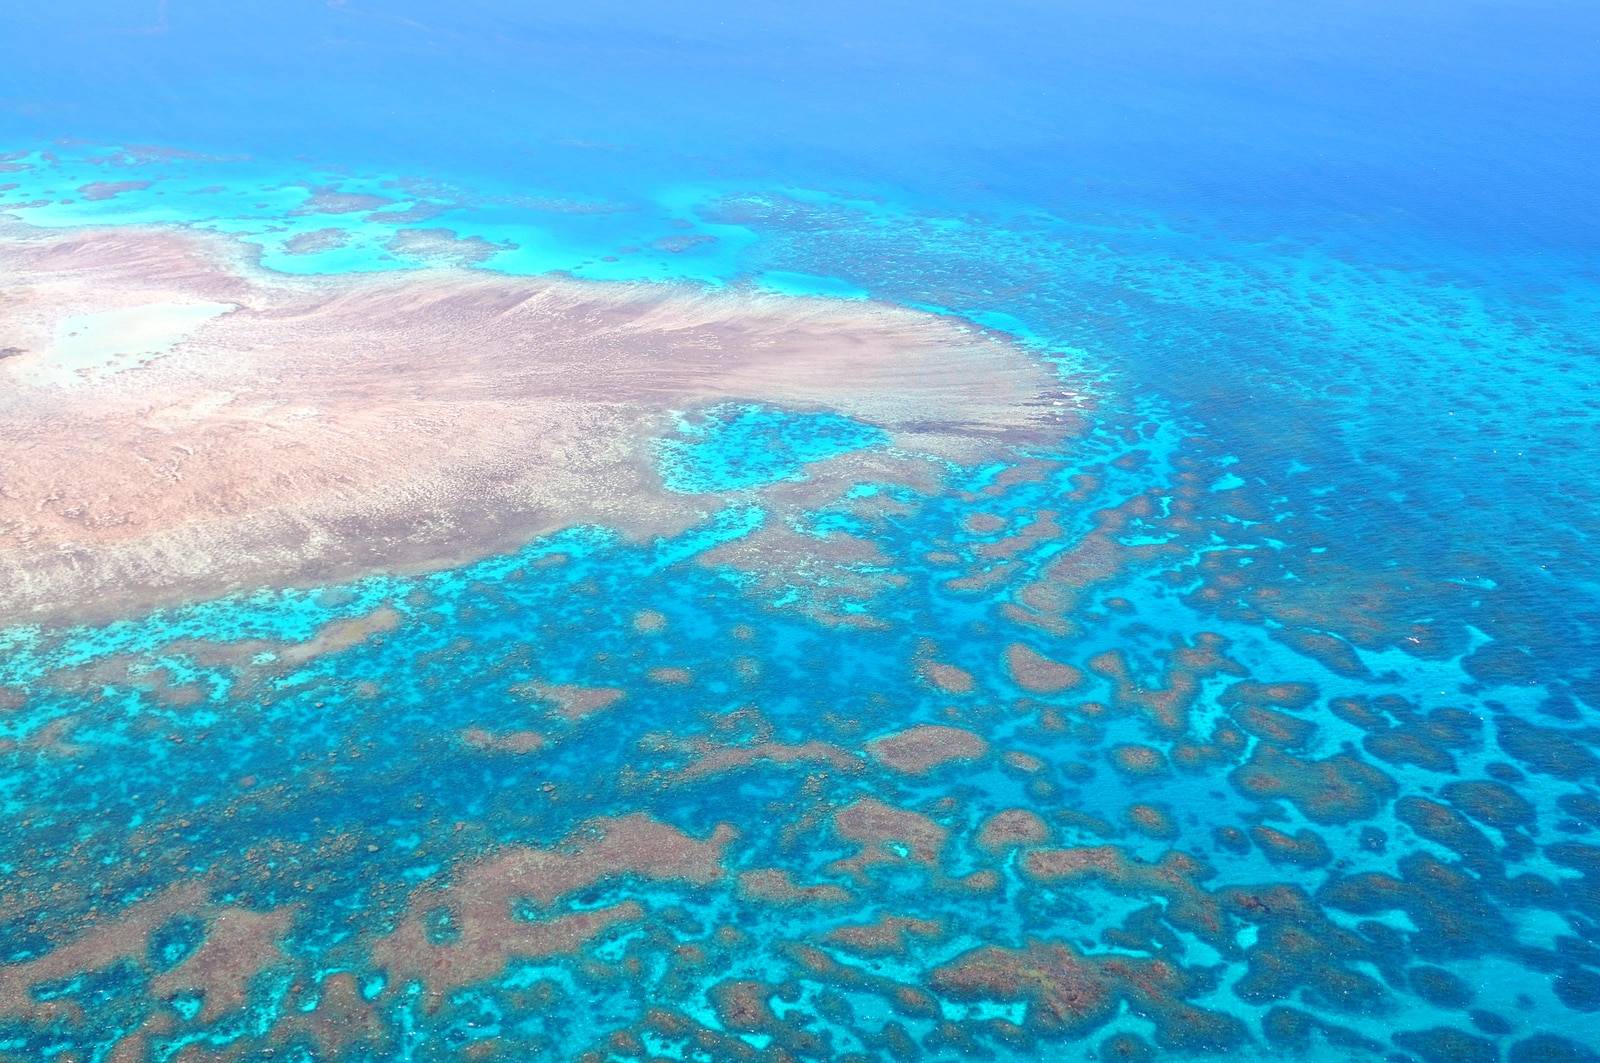 The Great Barrier Reef Struggles During Bleaching Crisis